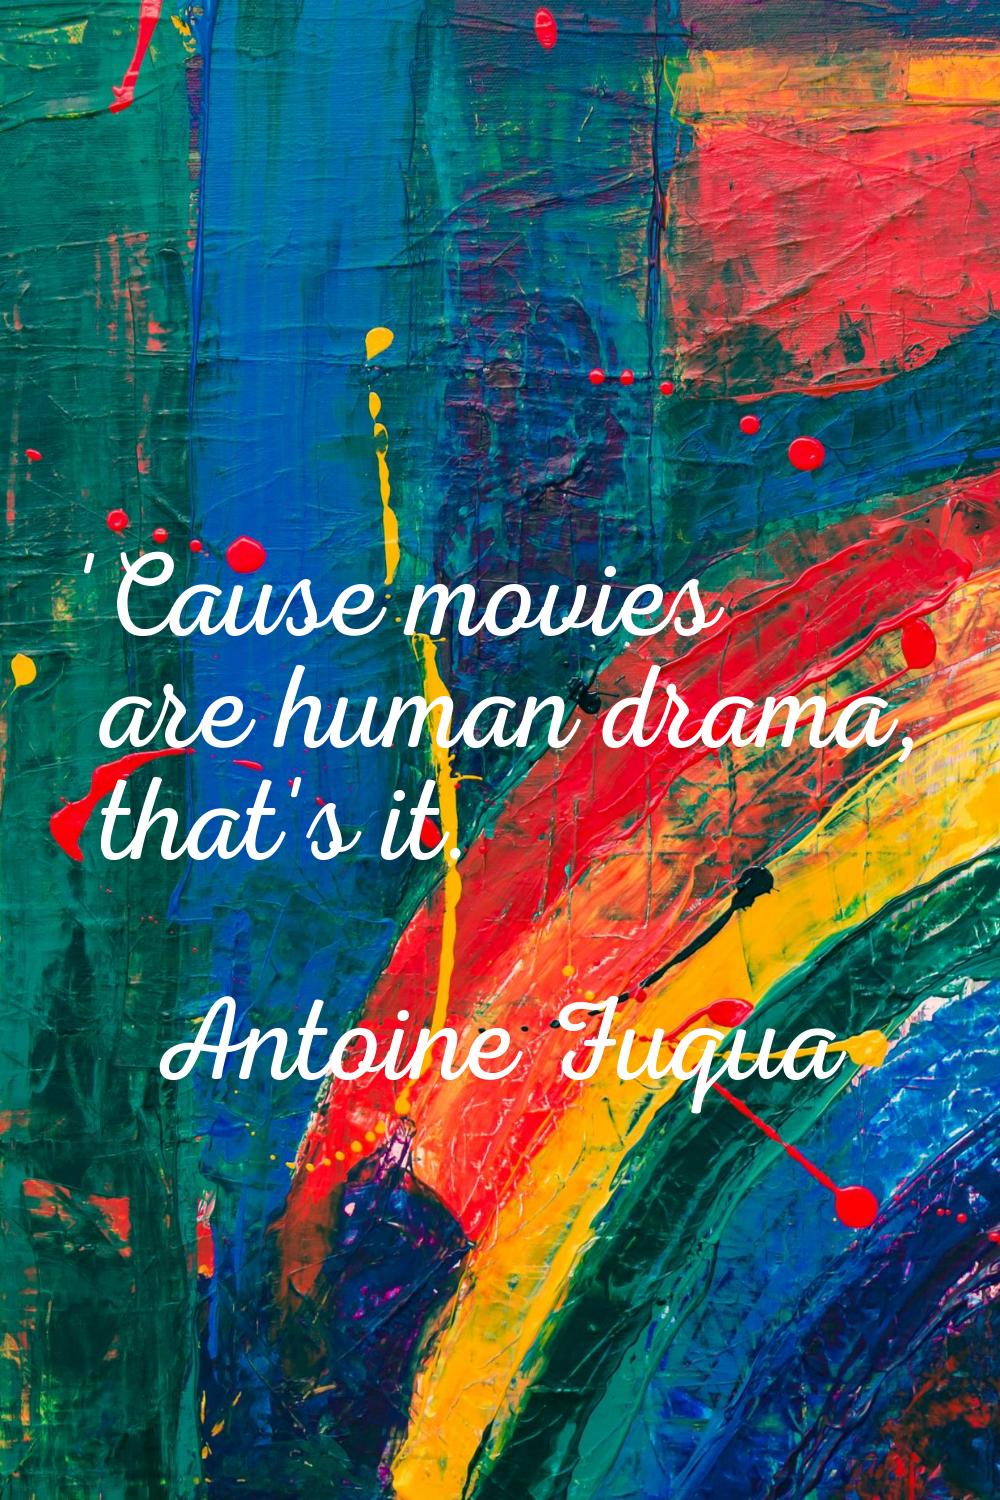 'Cause movies are human drama, that's it.